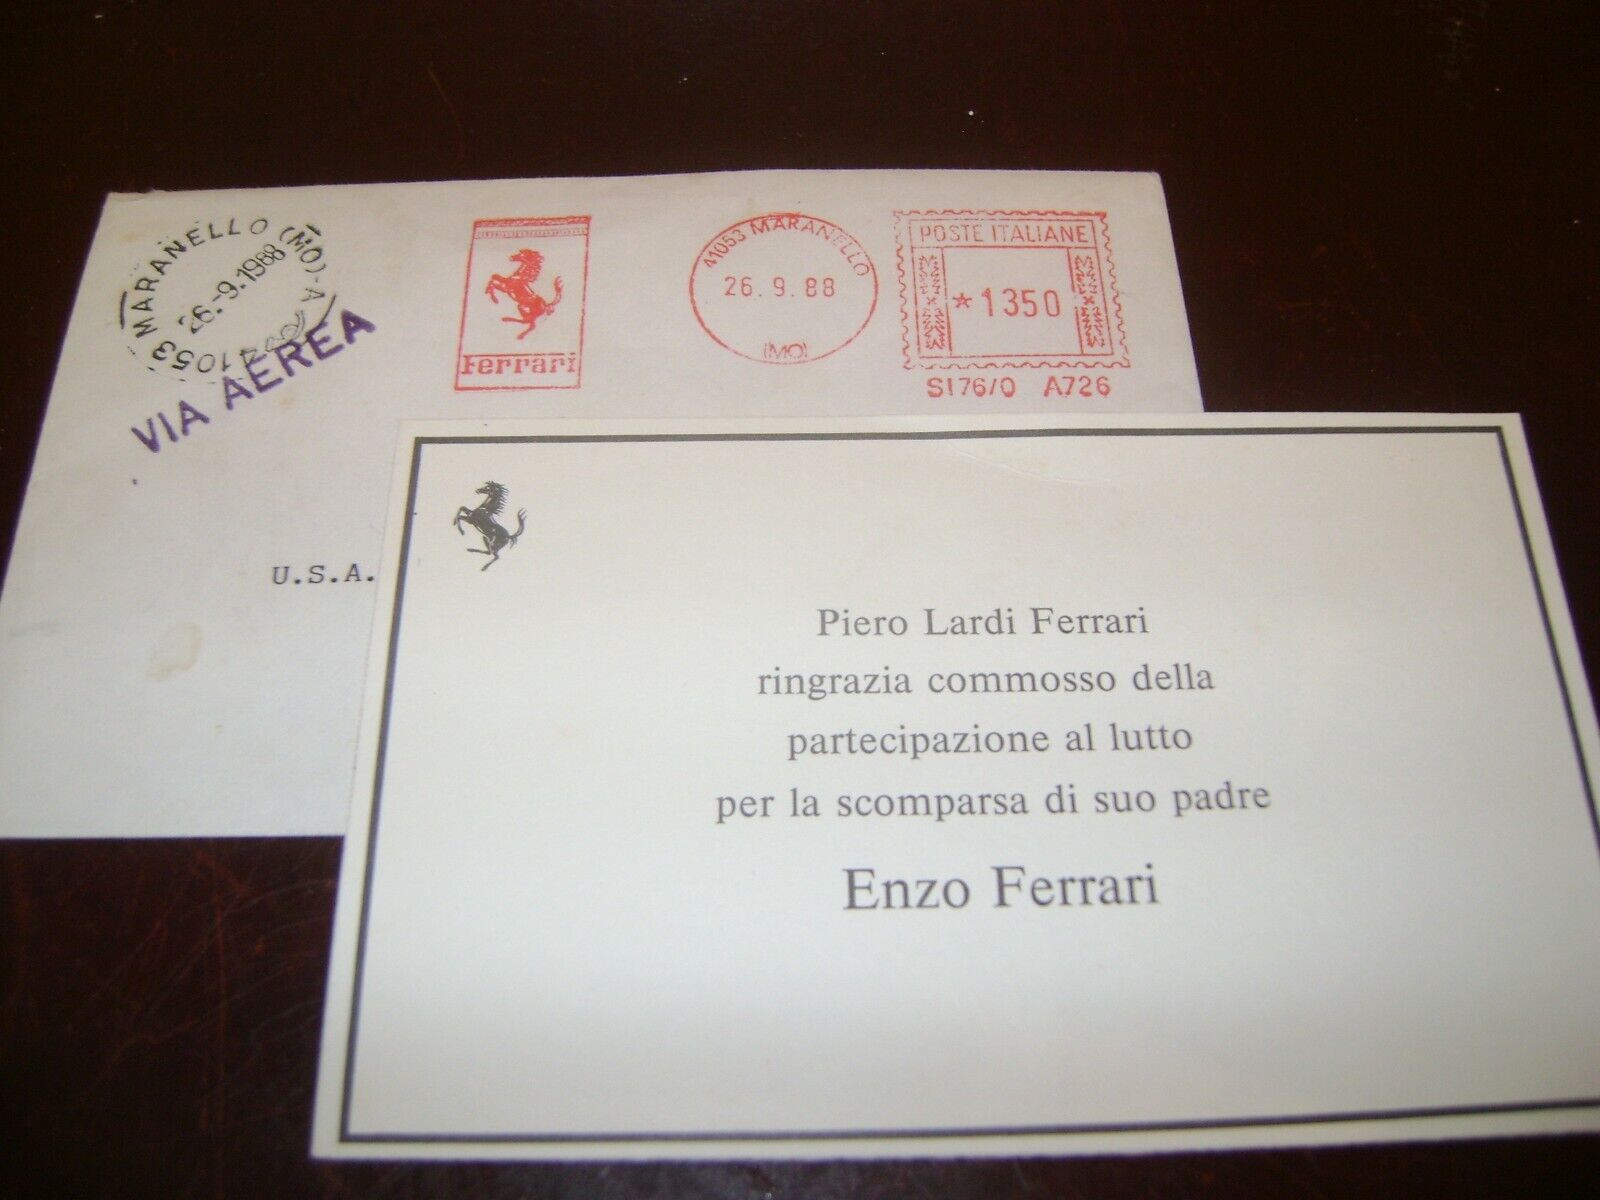 Enzo Ferrari Funeral Card with Post Marked Envelope - 9/26/1988